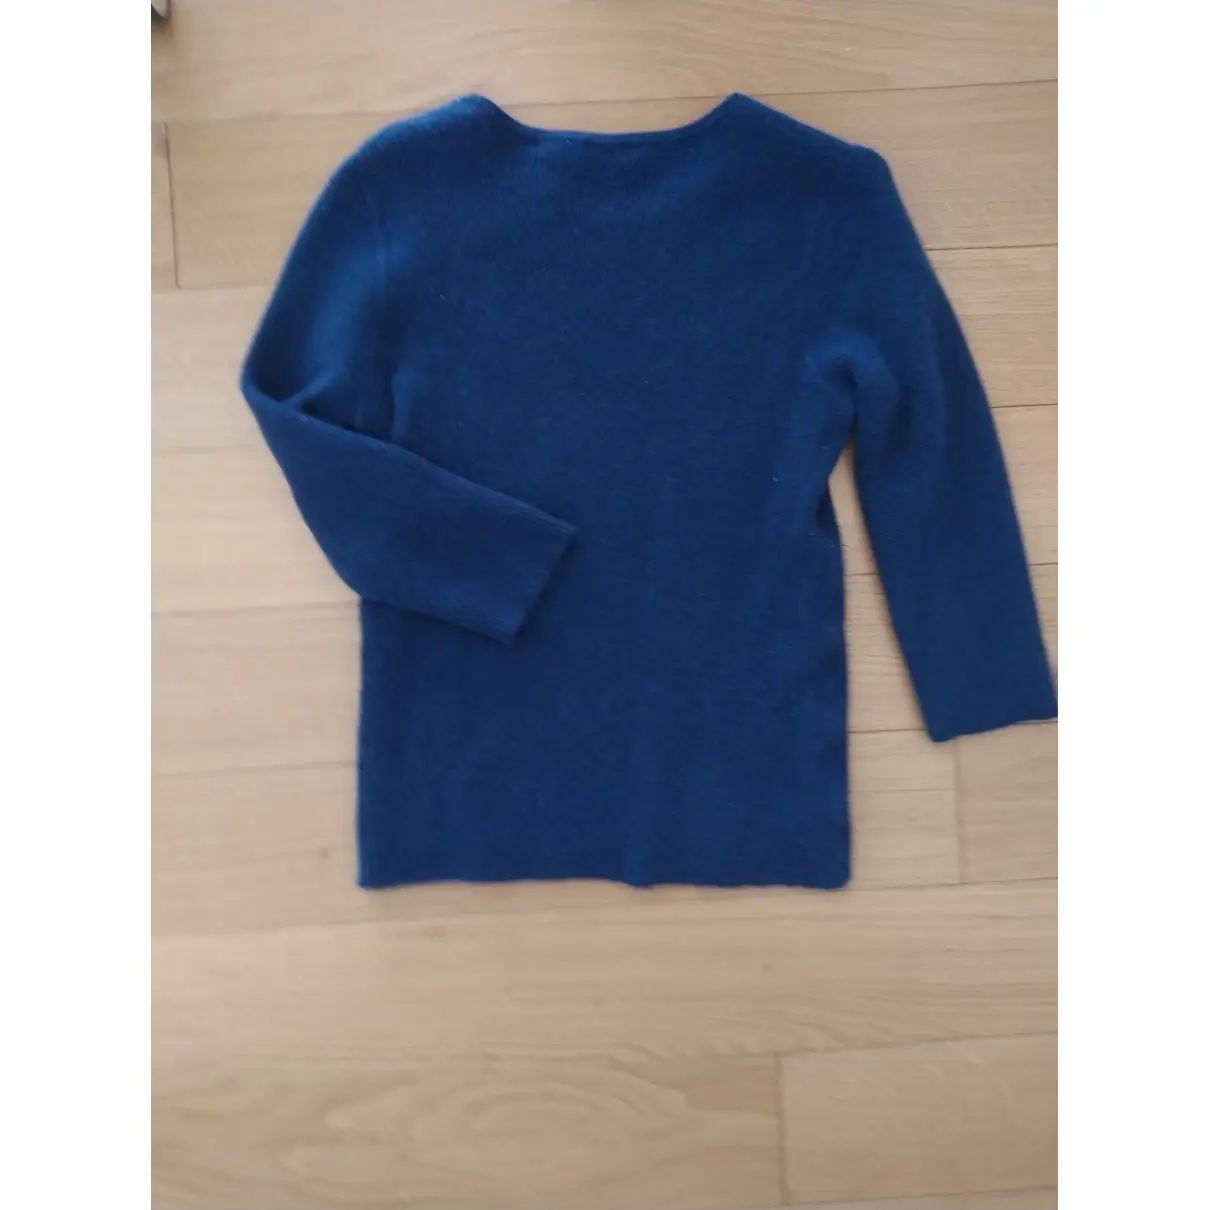 Buy Marc Jacobs Cashmere knitwear online